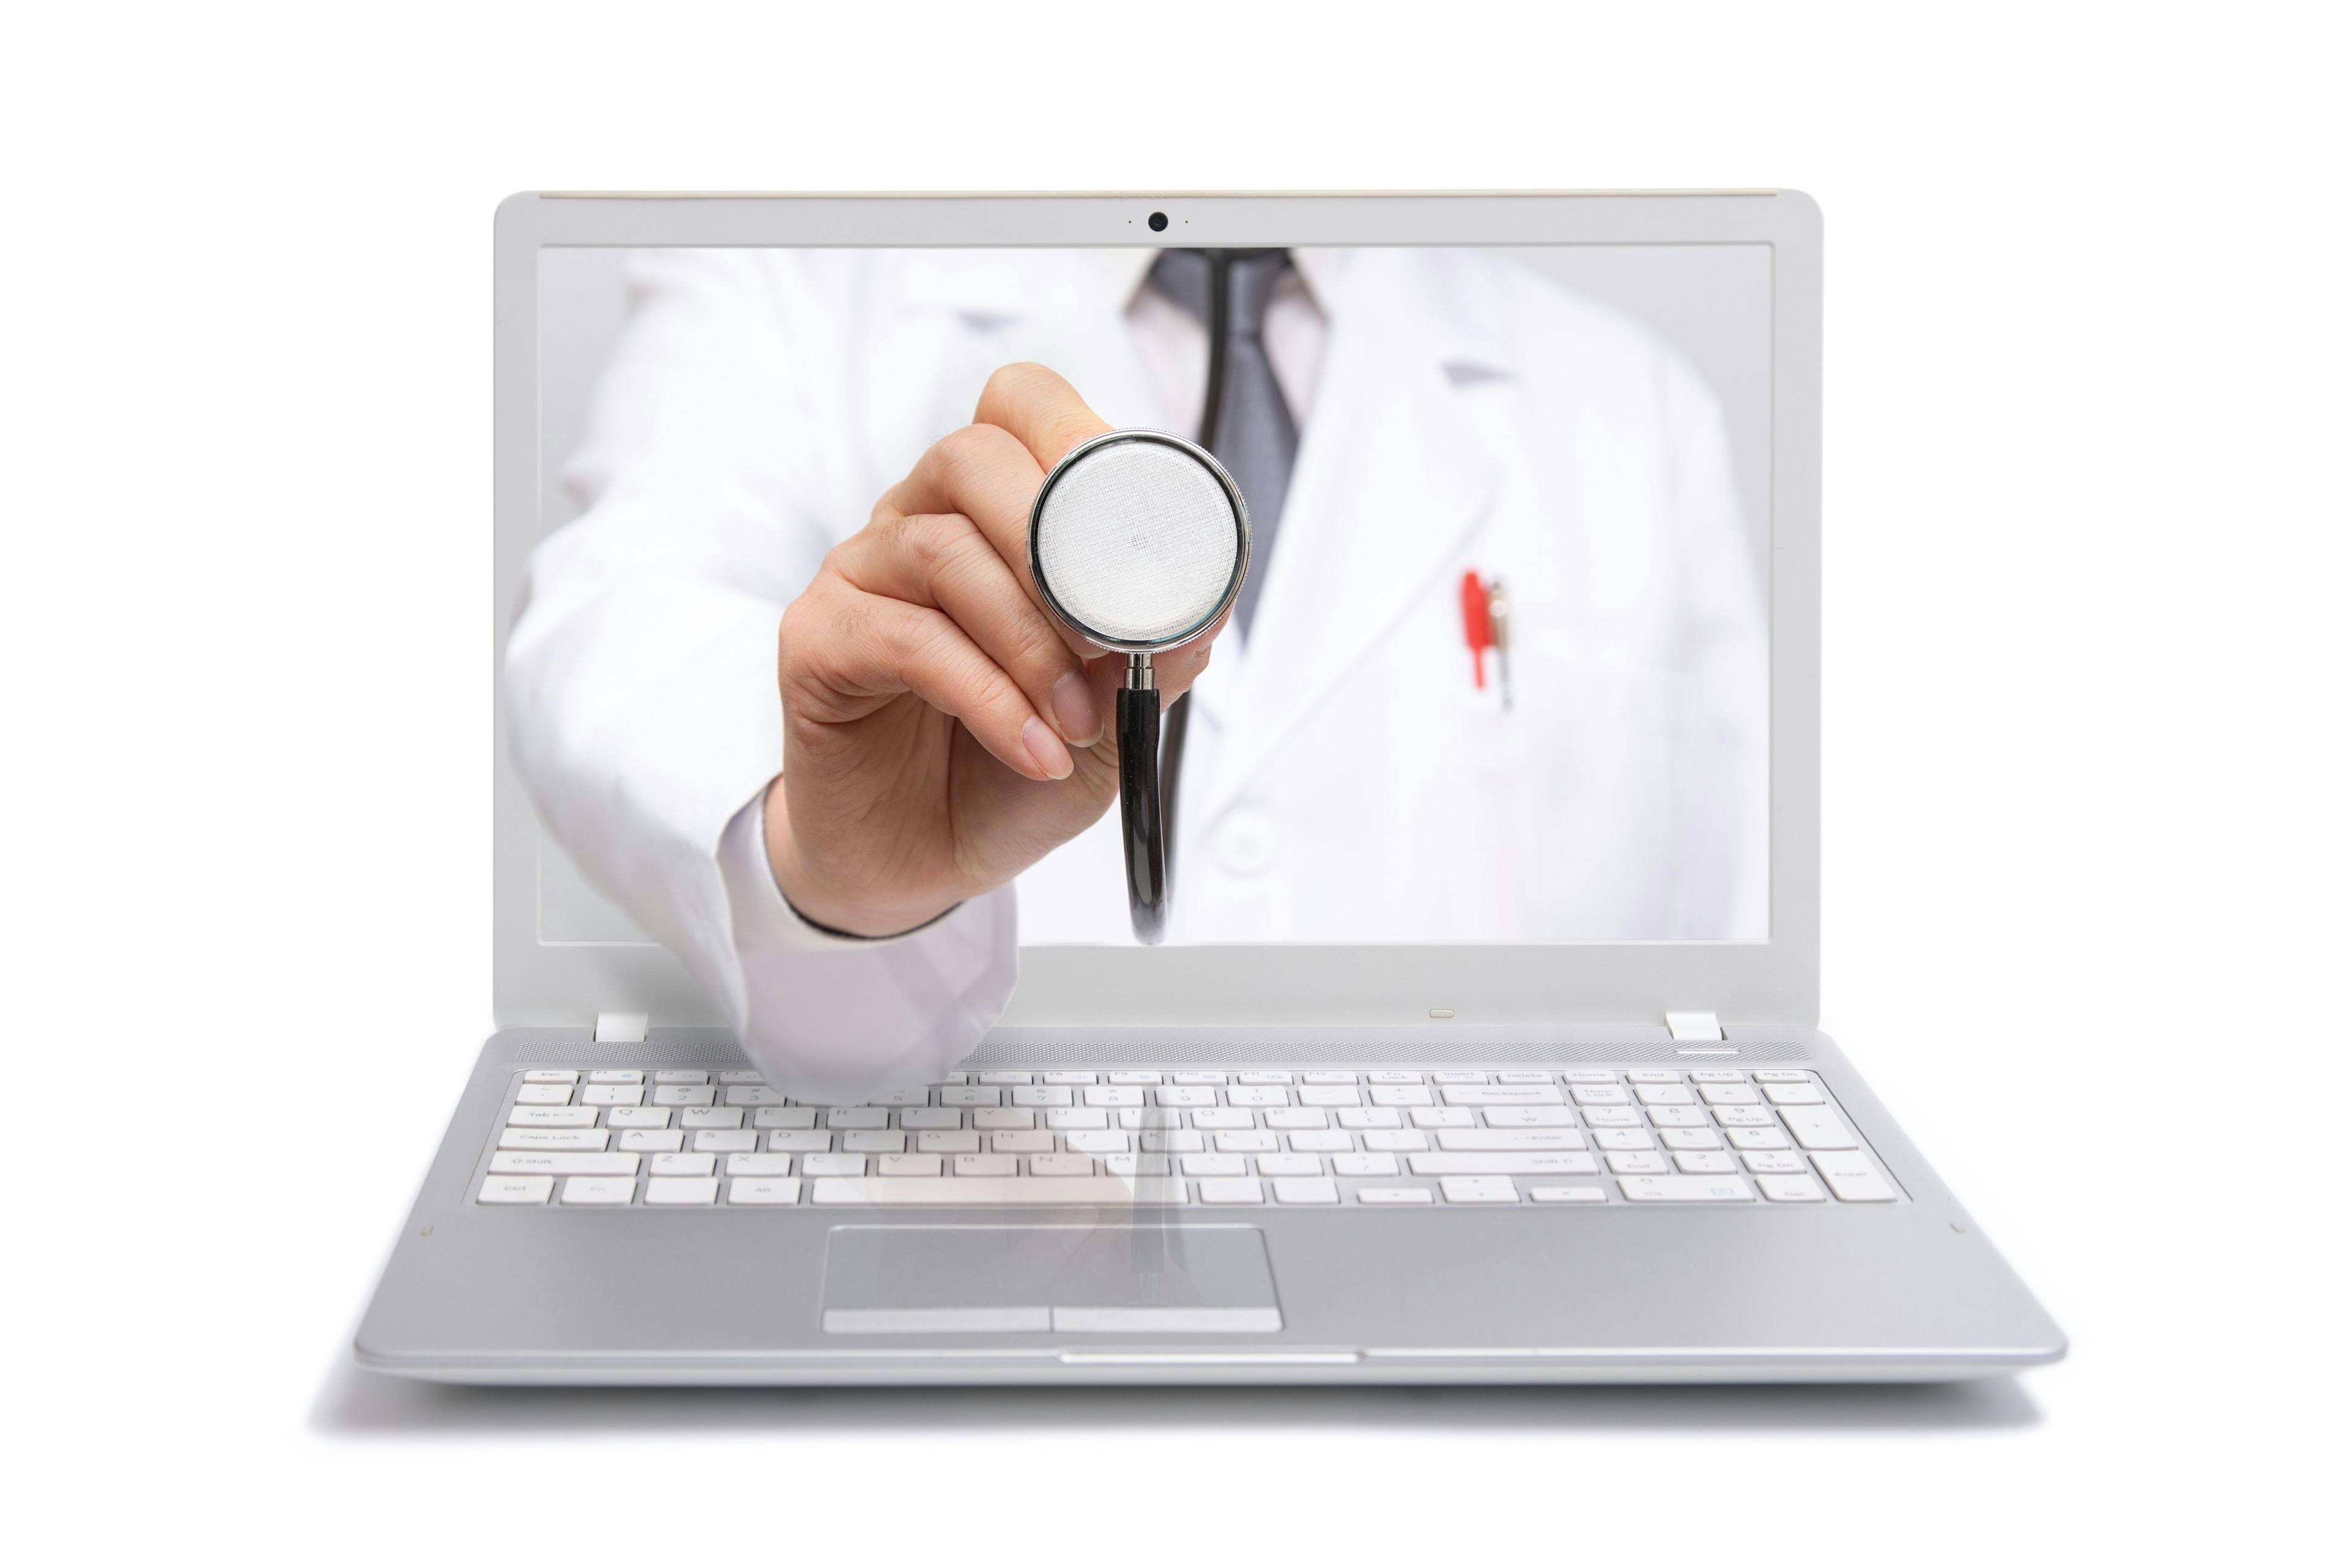 Helping patients navigate telehealth video visits pays off